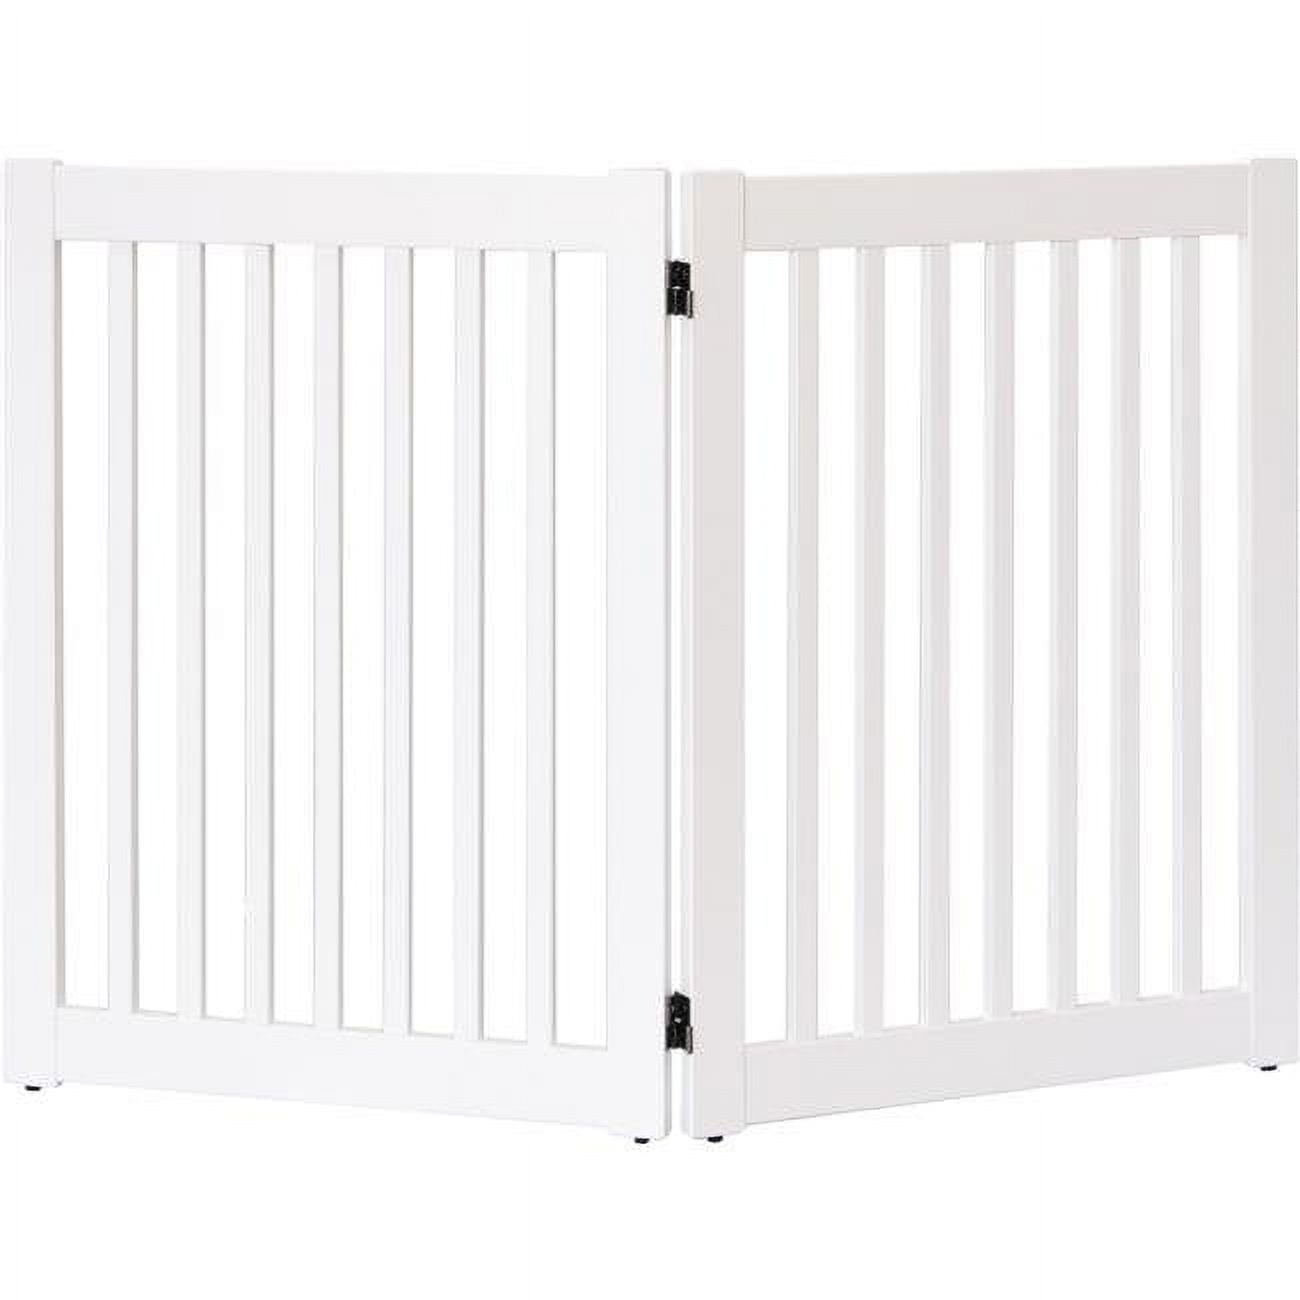 Dynamic Accents Da201 32 In. Highlander Series Solid Wood Pet Gate, White - 2 Panel